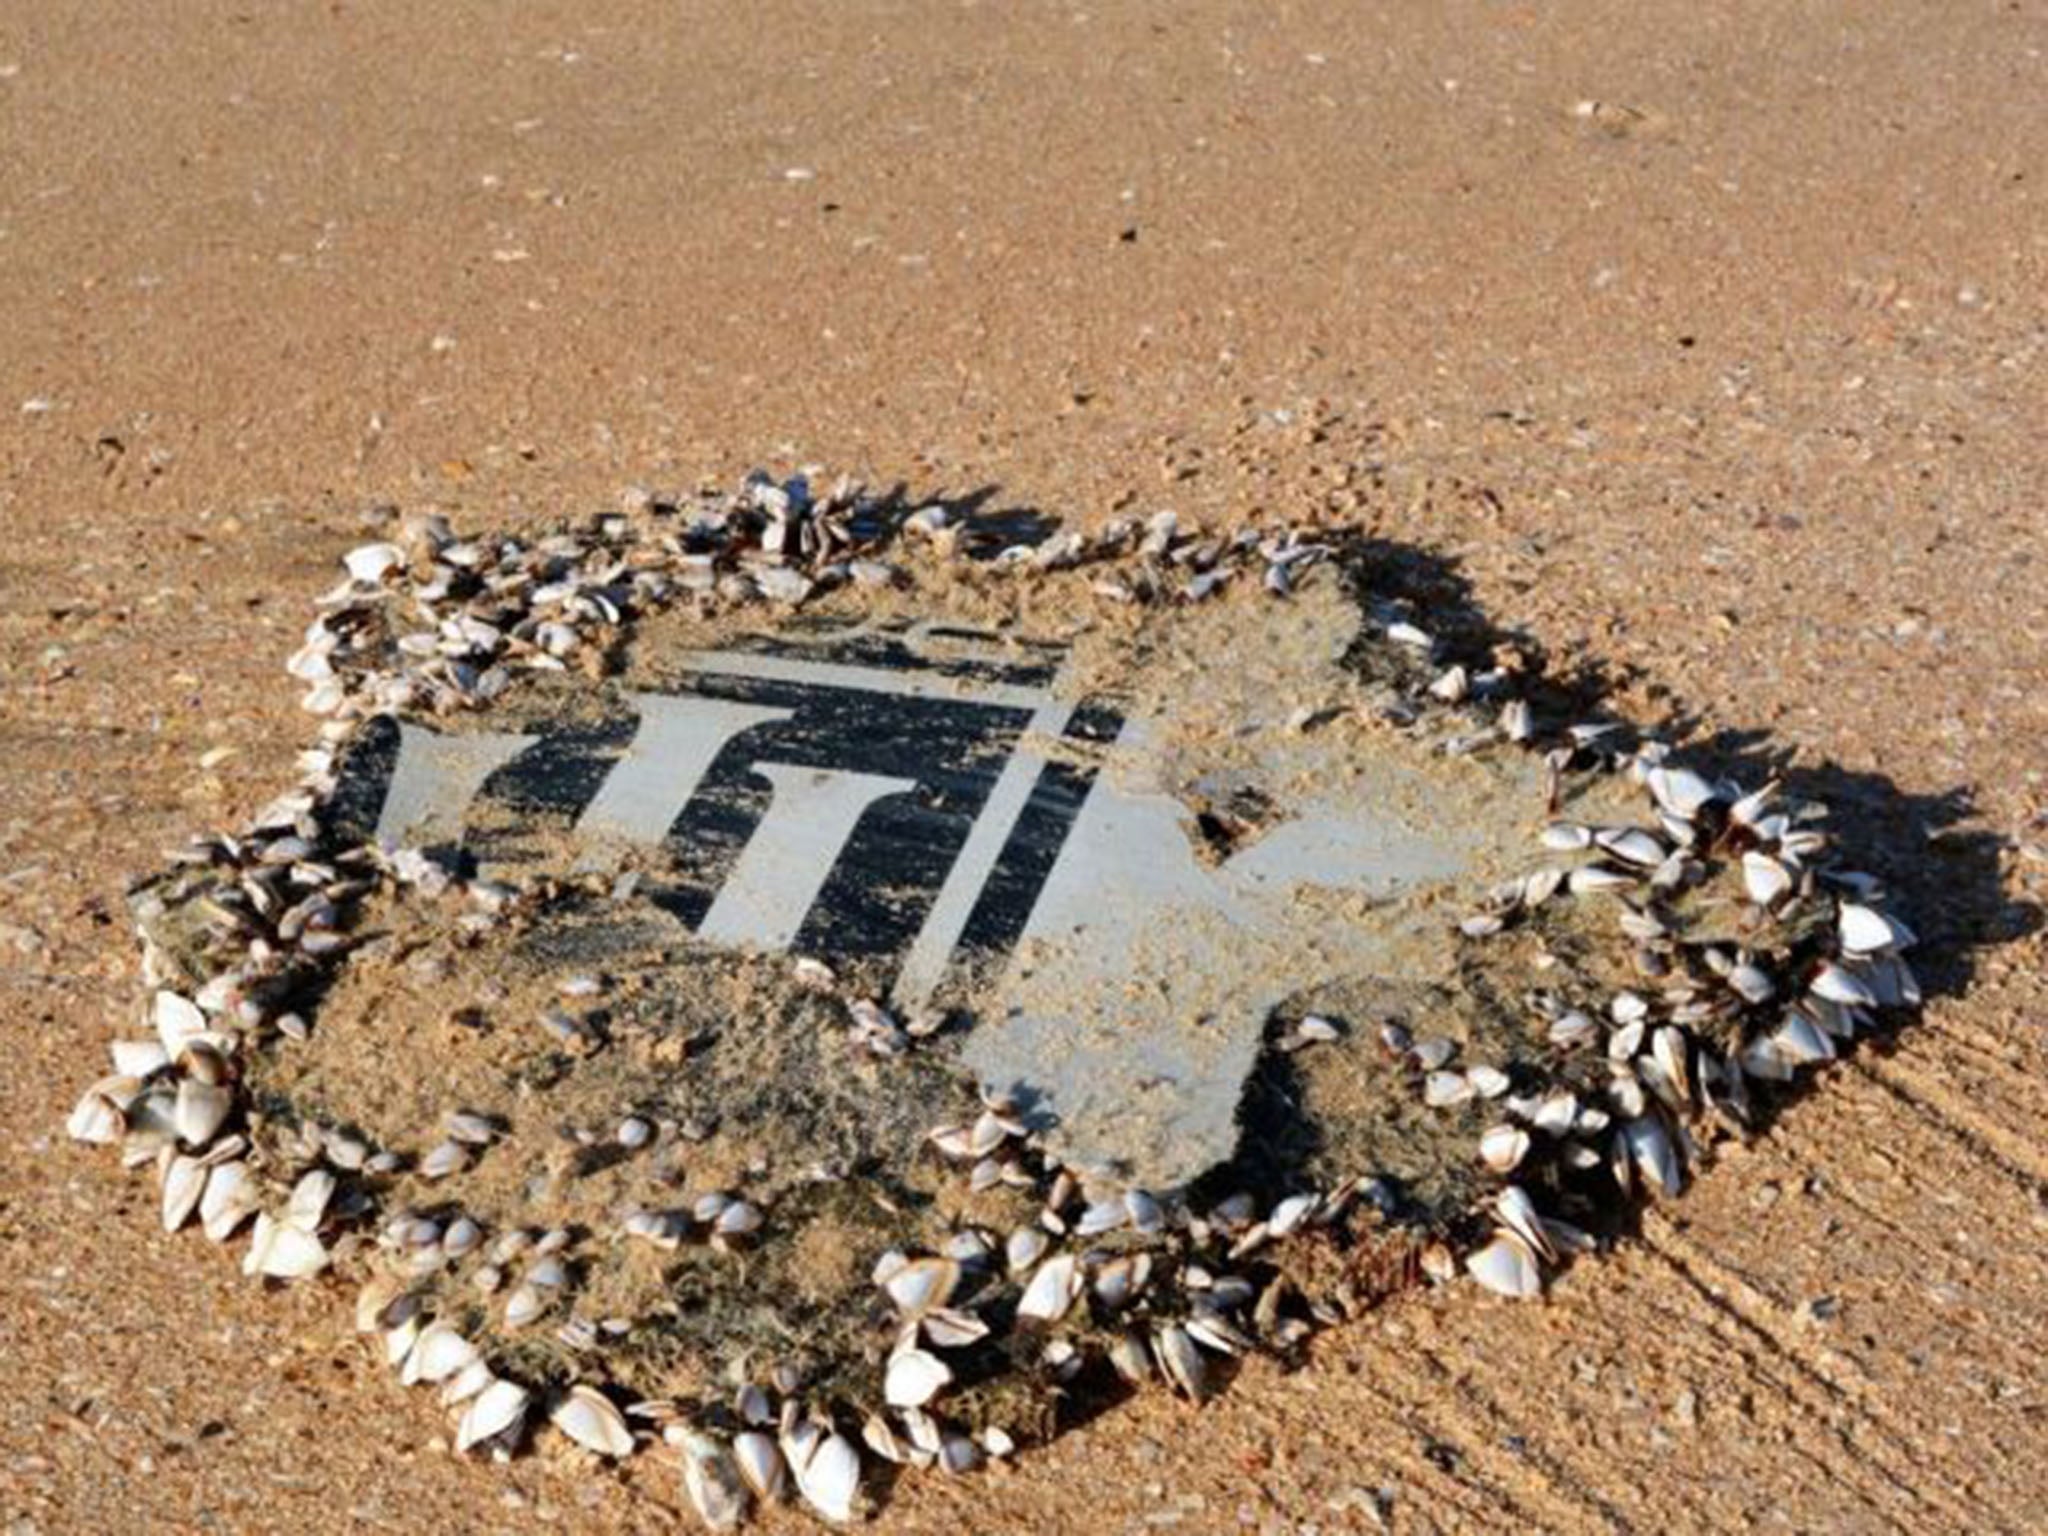 A piece of the missing MH370 aircraft engine cowling stamped with the Rolls Royce logo. It was found on a South African beach in December 2015